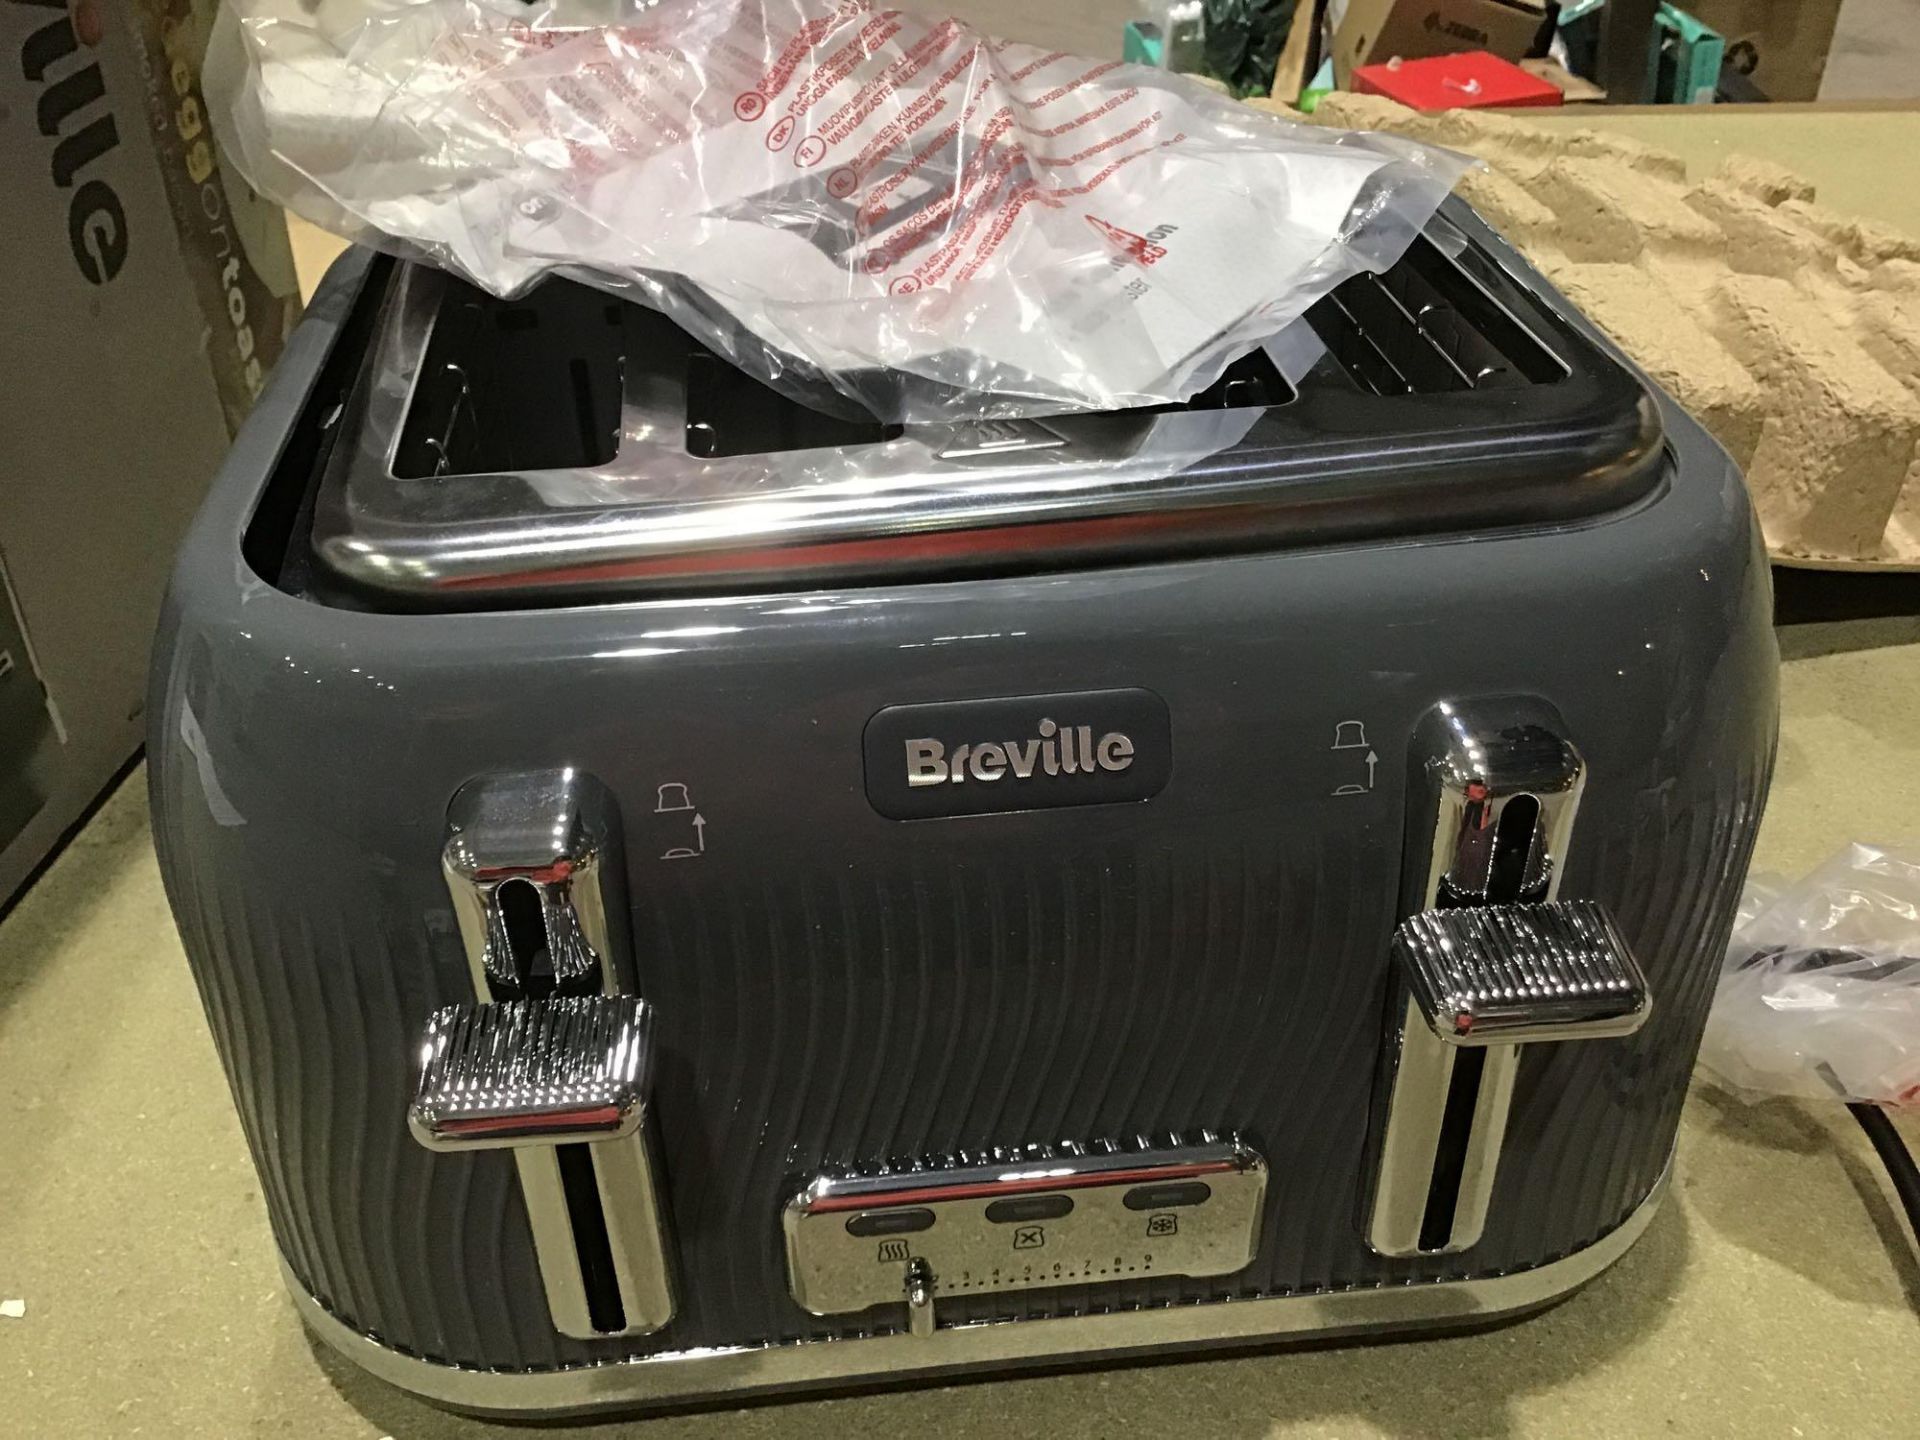 Breville VKT892 Flow 4-Slice Toaster with High-Lift and Wide Slots, Grey £42.99 RRP - Image 3 of 4